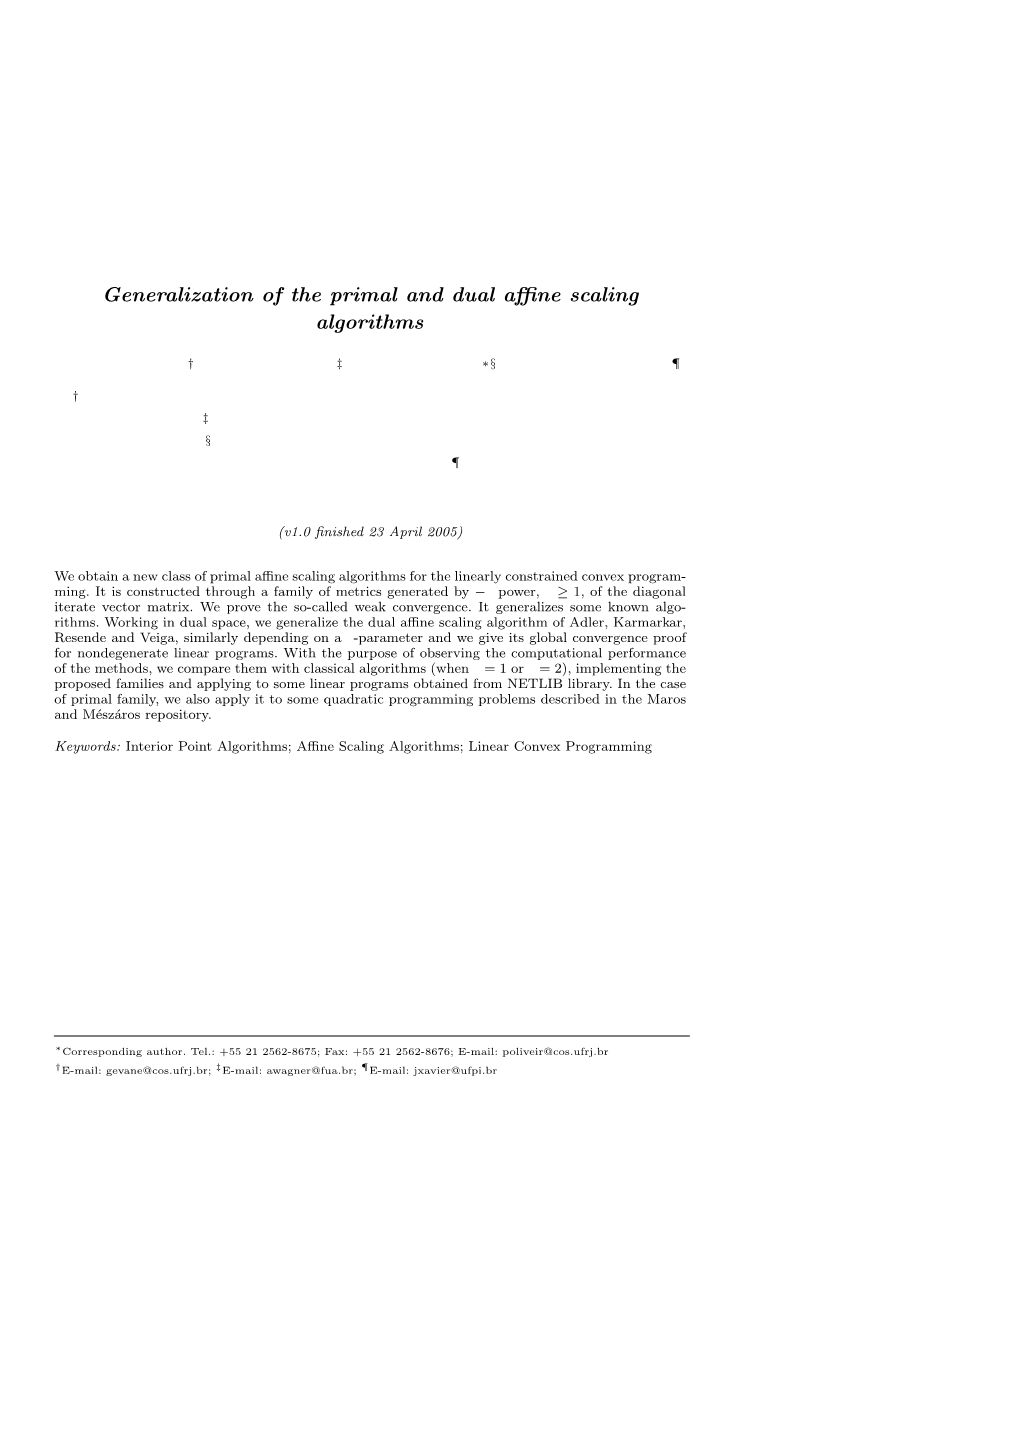 Generalization of the Primal and Dual Affine Scaling Algorithms